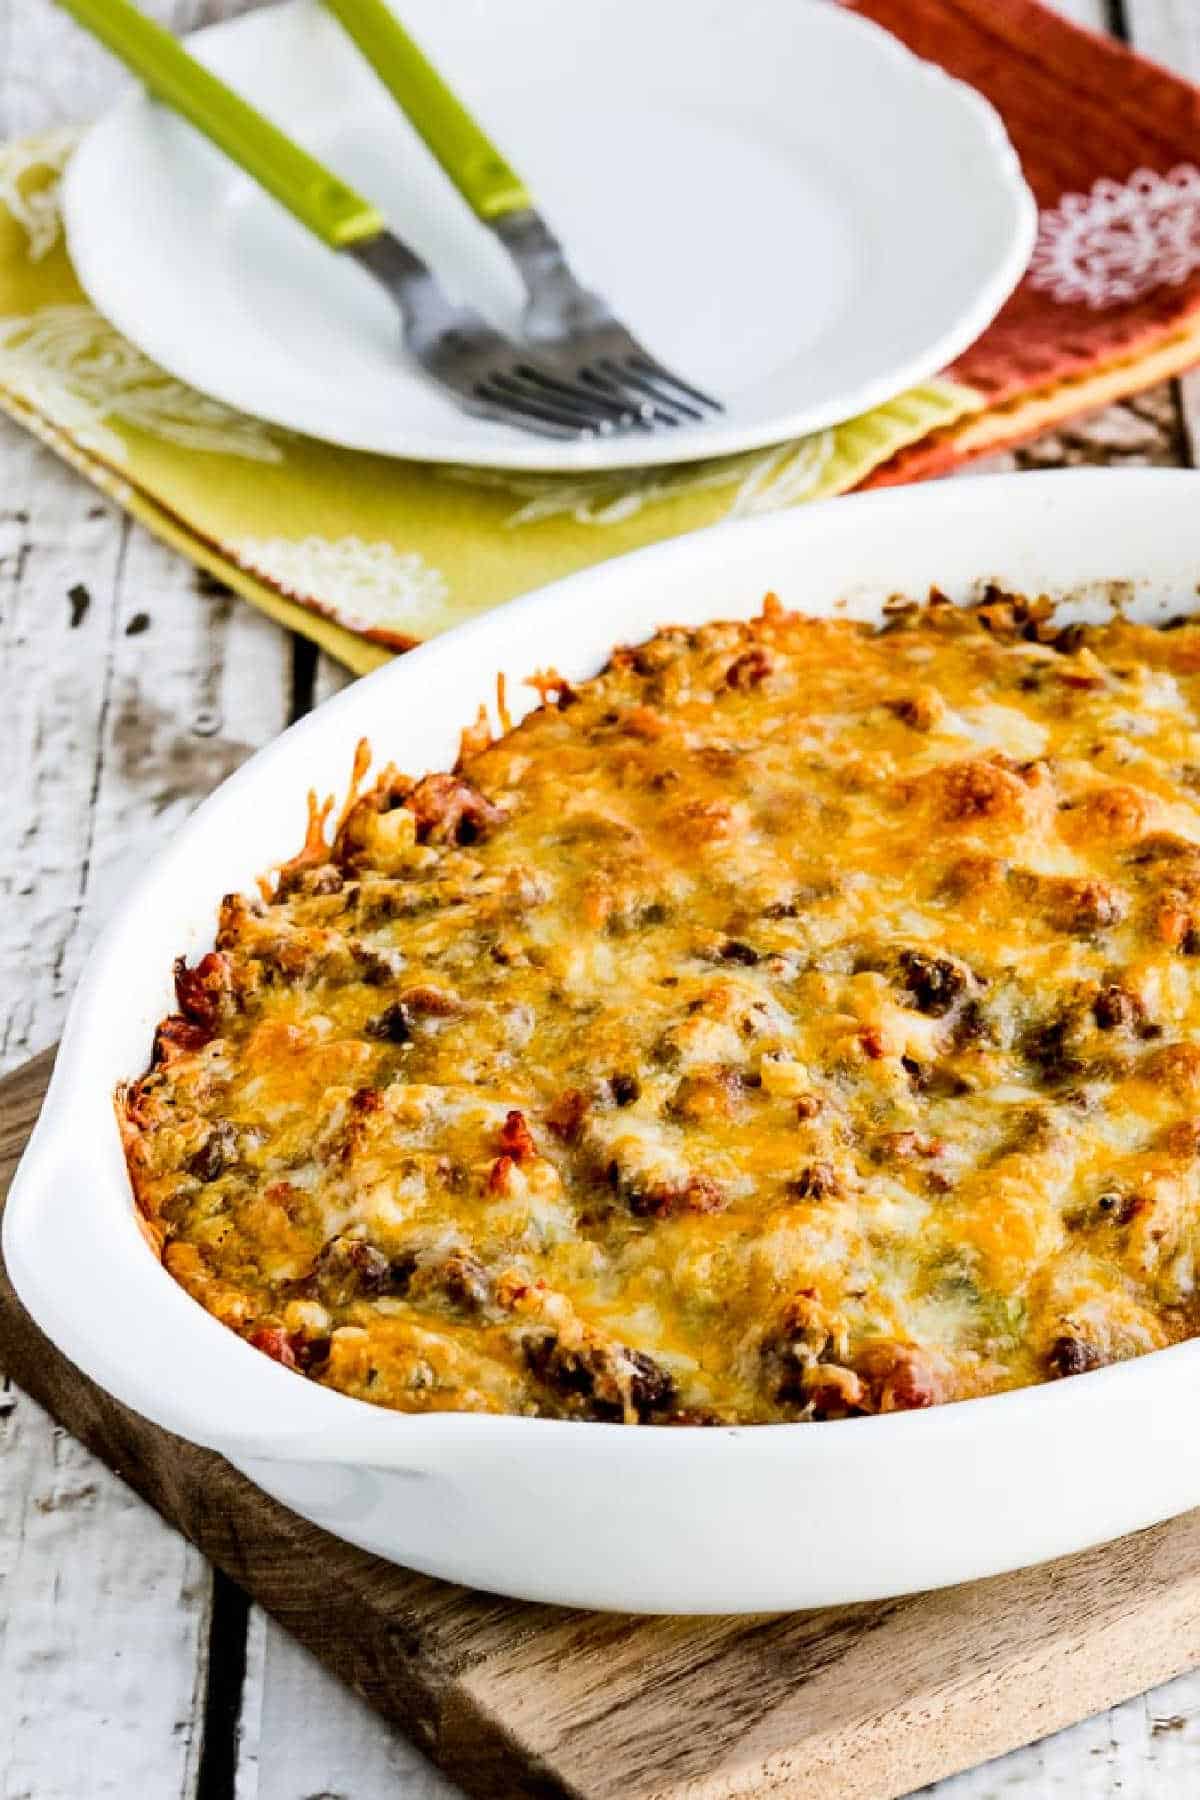 Cheesy Low-Carb Taco Casserole in baking dish shown on napkin